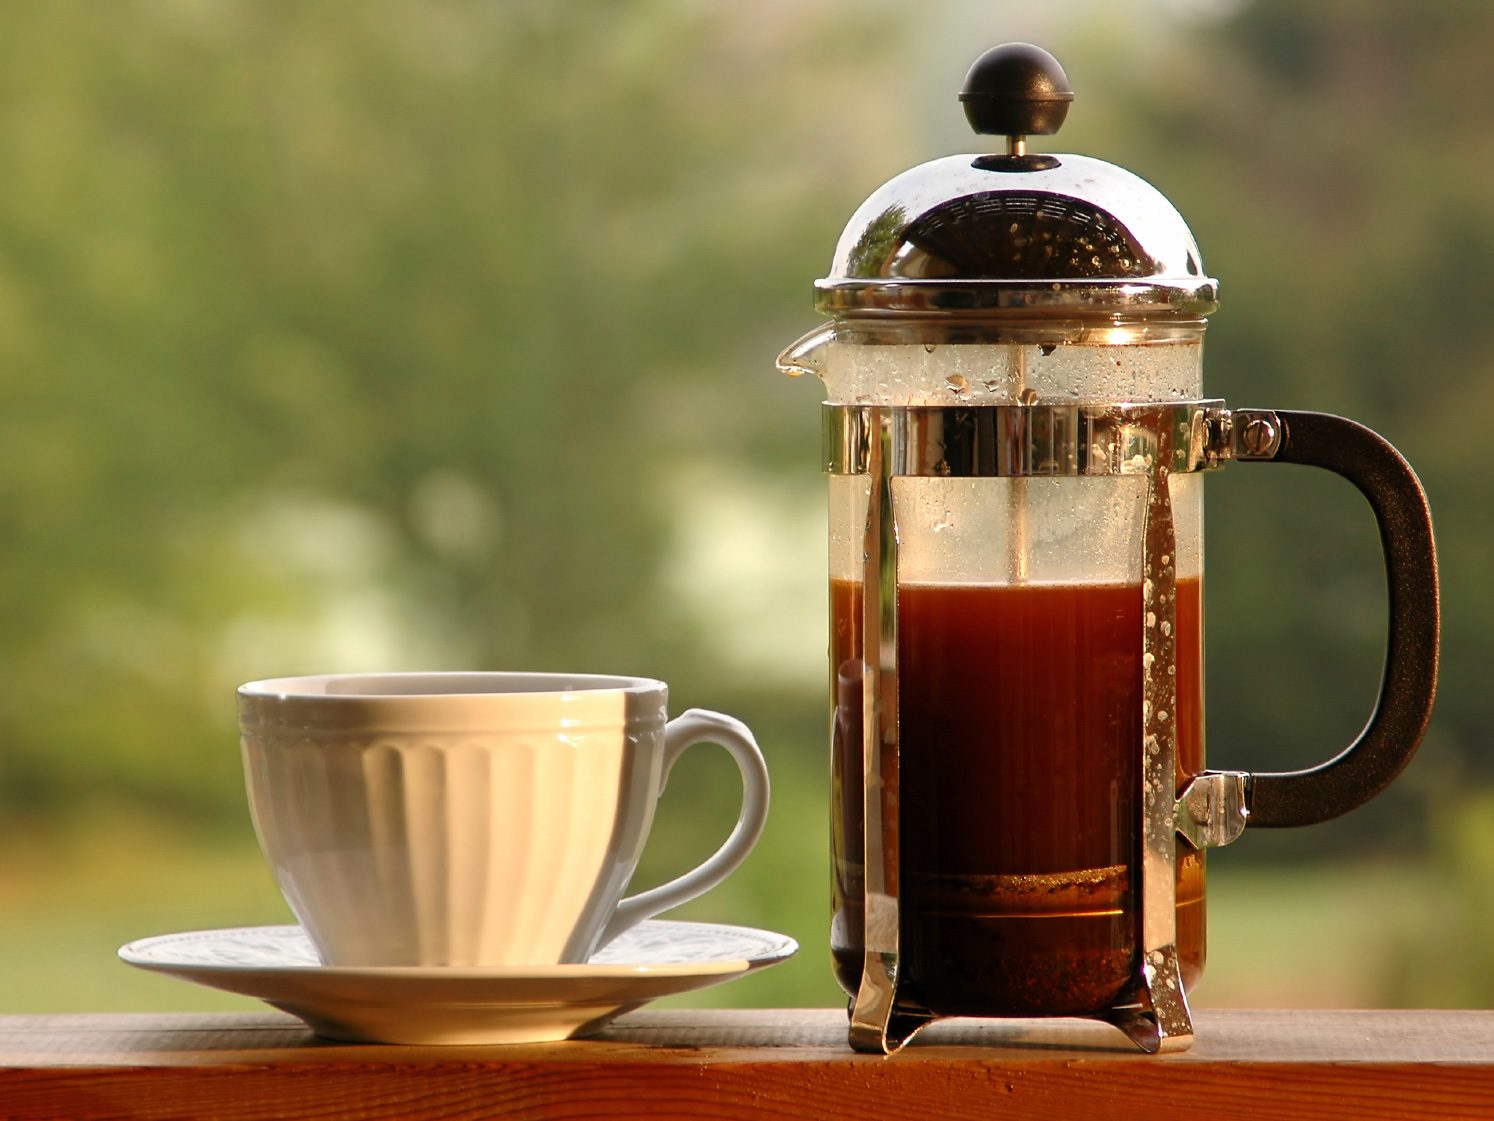 Kitchen-Cleaning Tips: Clean Your Coffee Pot